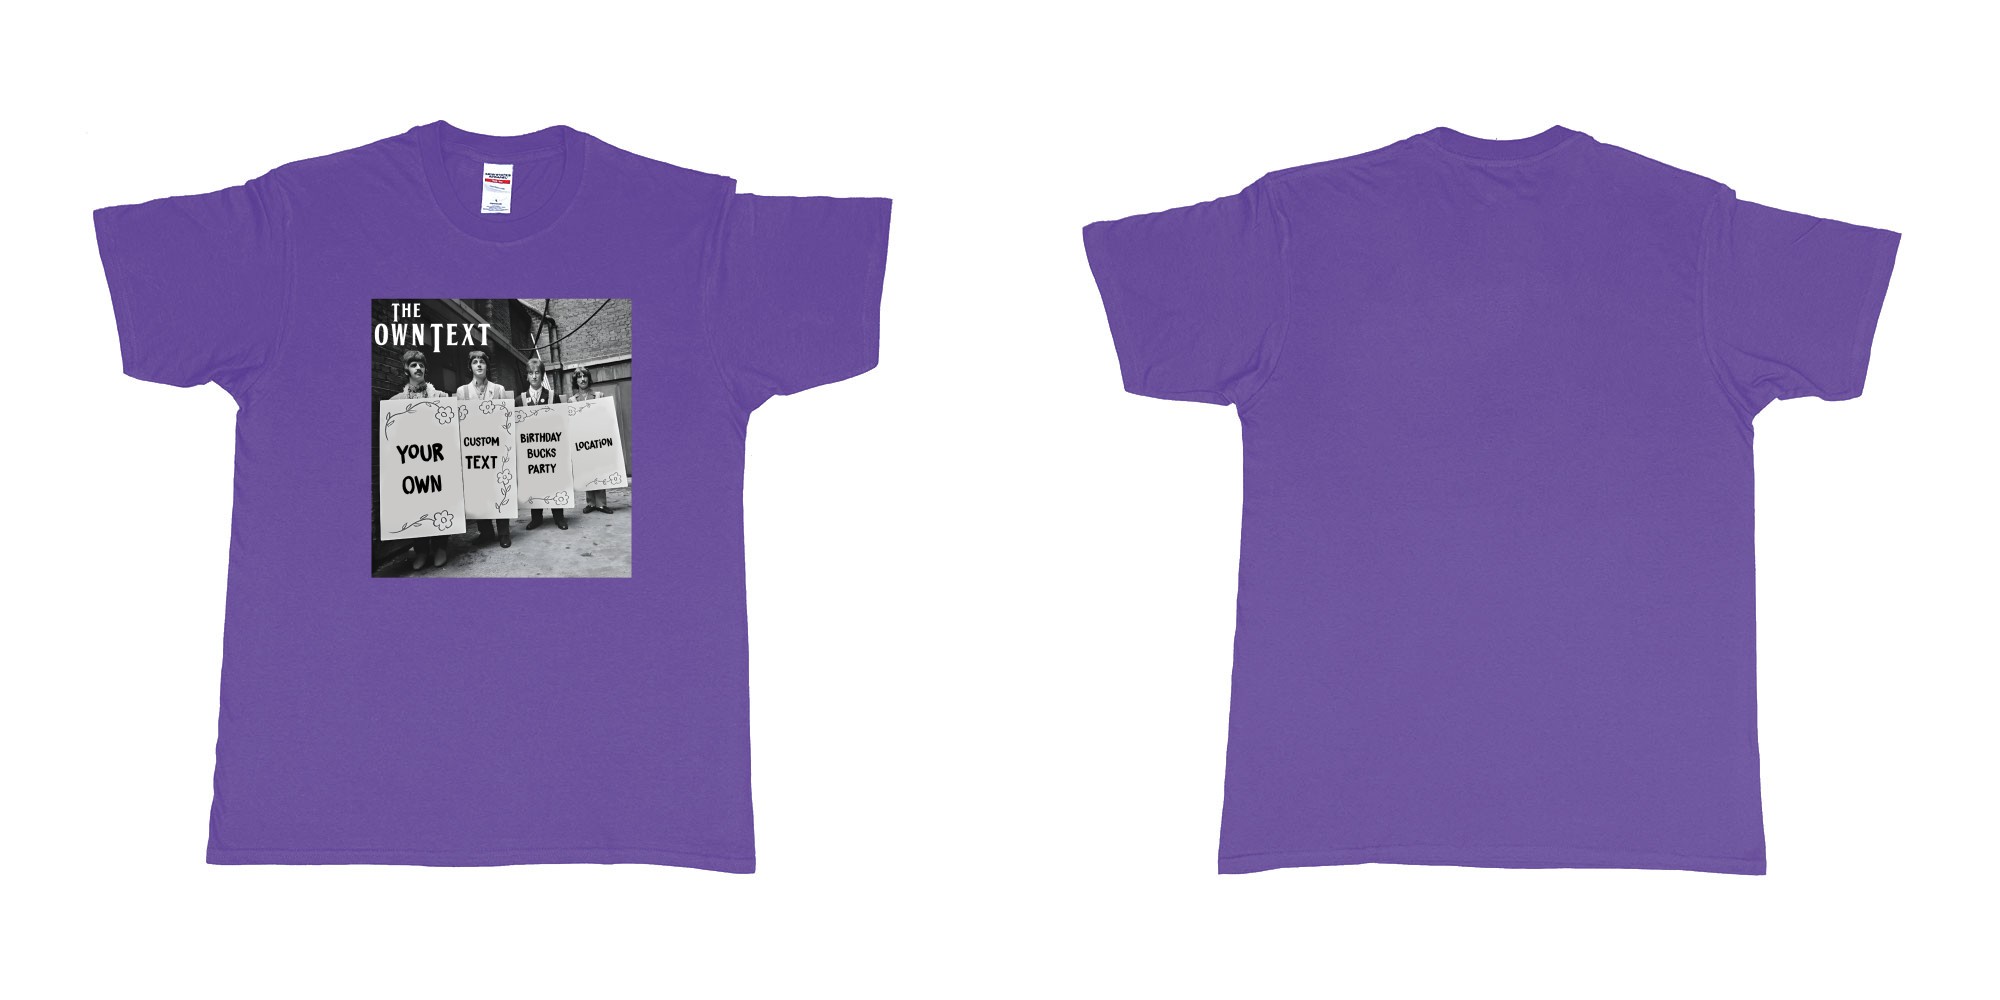 Custom tshirt design the beatles holding signs custom text in fabric color purple choice your own text made in Bali by The Pirate Way